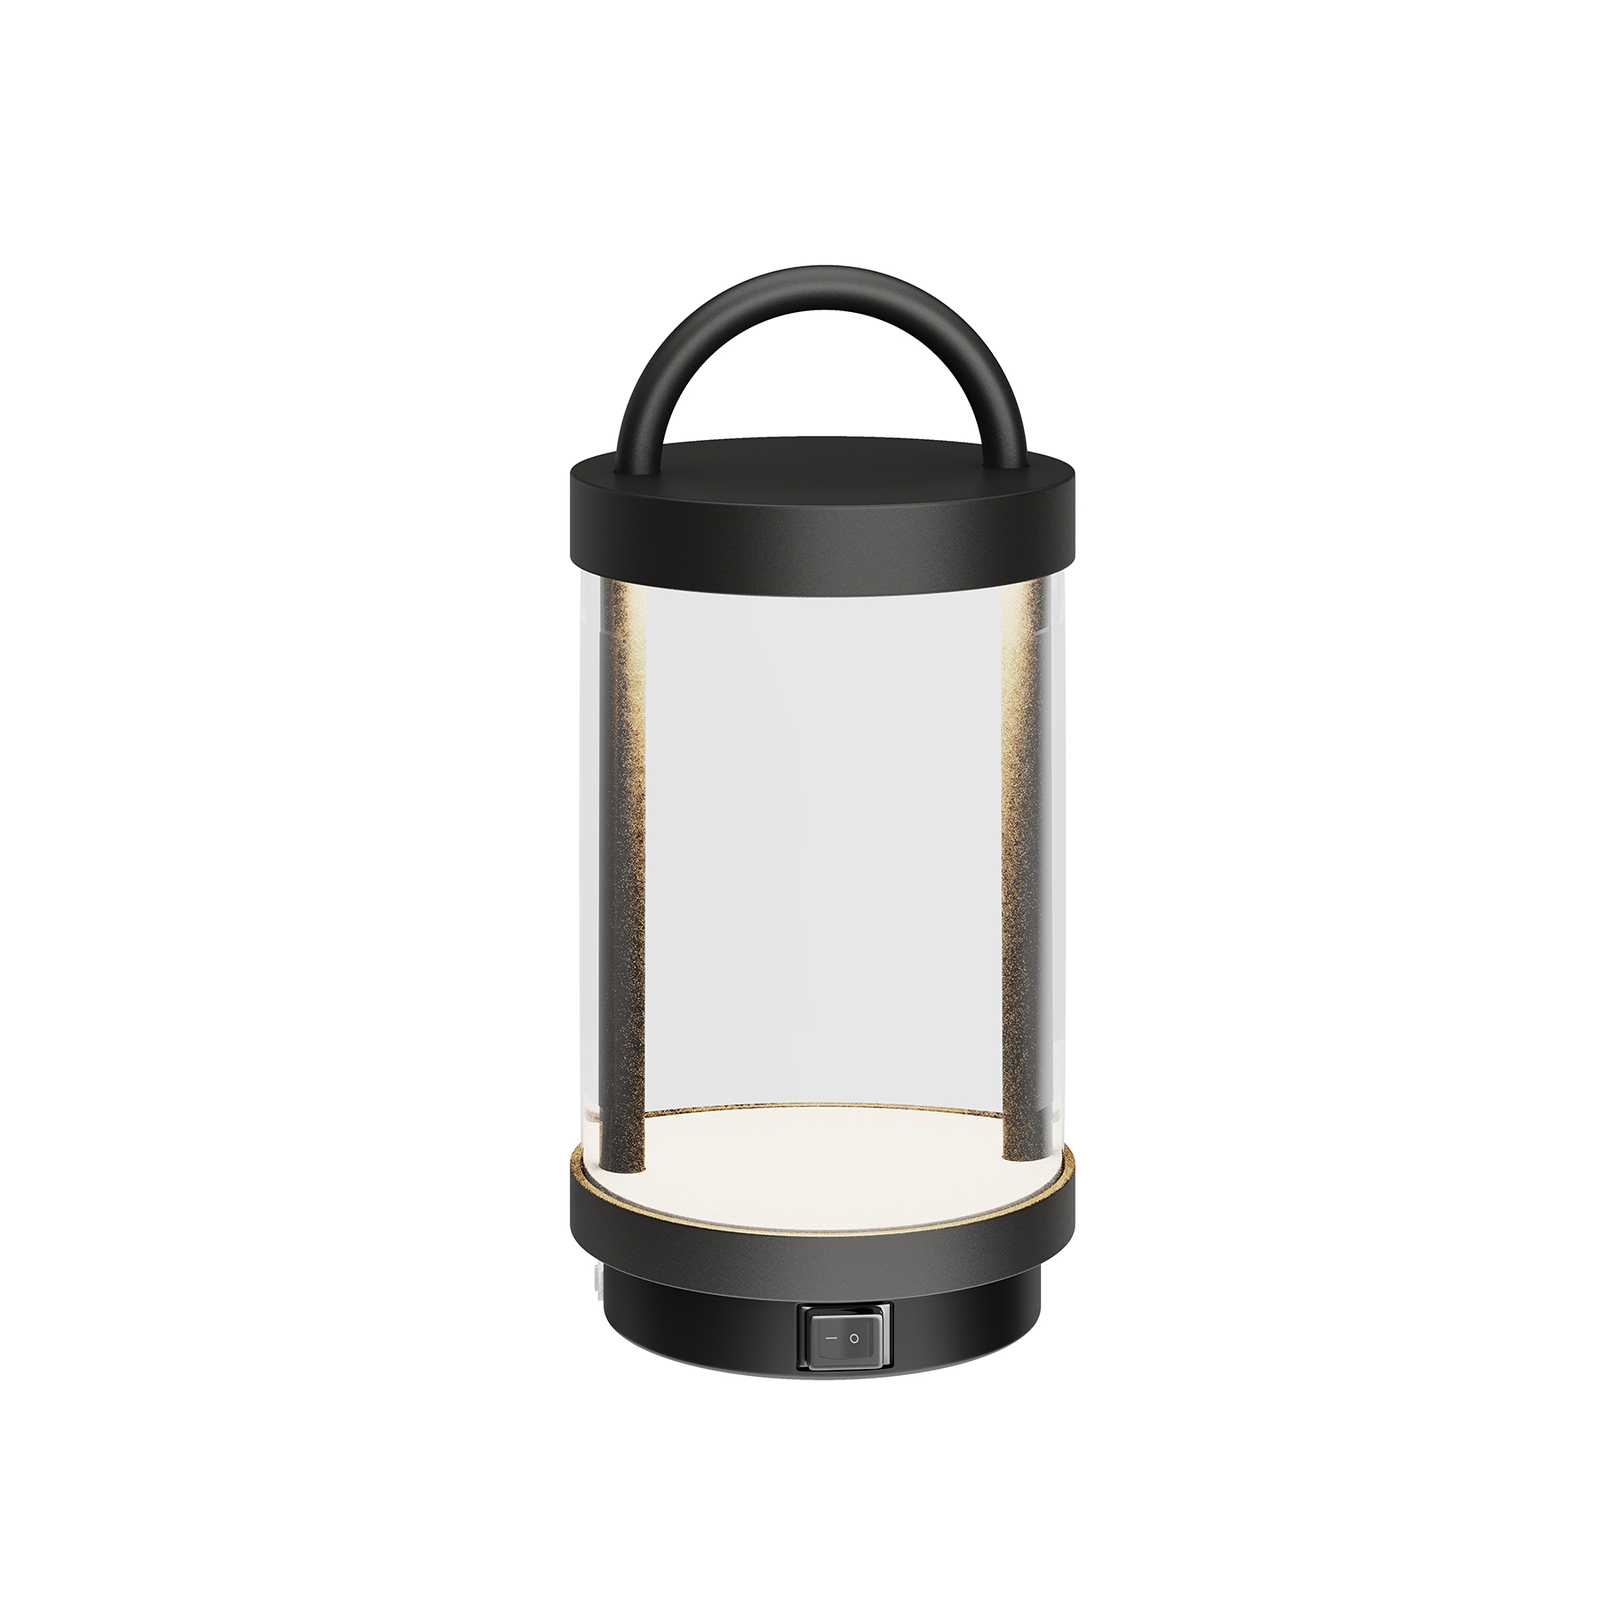 Lucande Caius LED decorative light for outdoors | Lights.co.uk